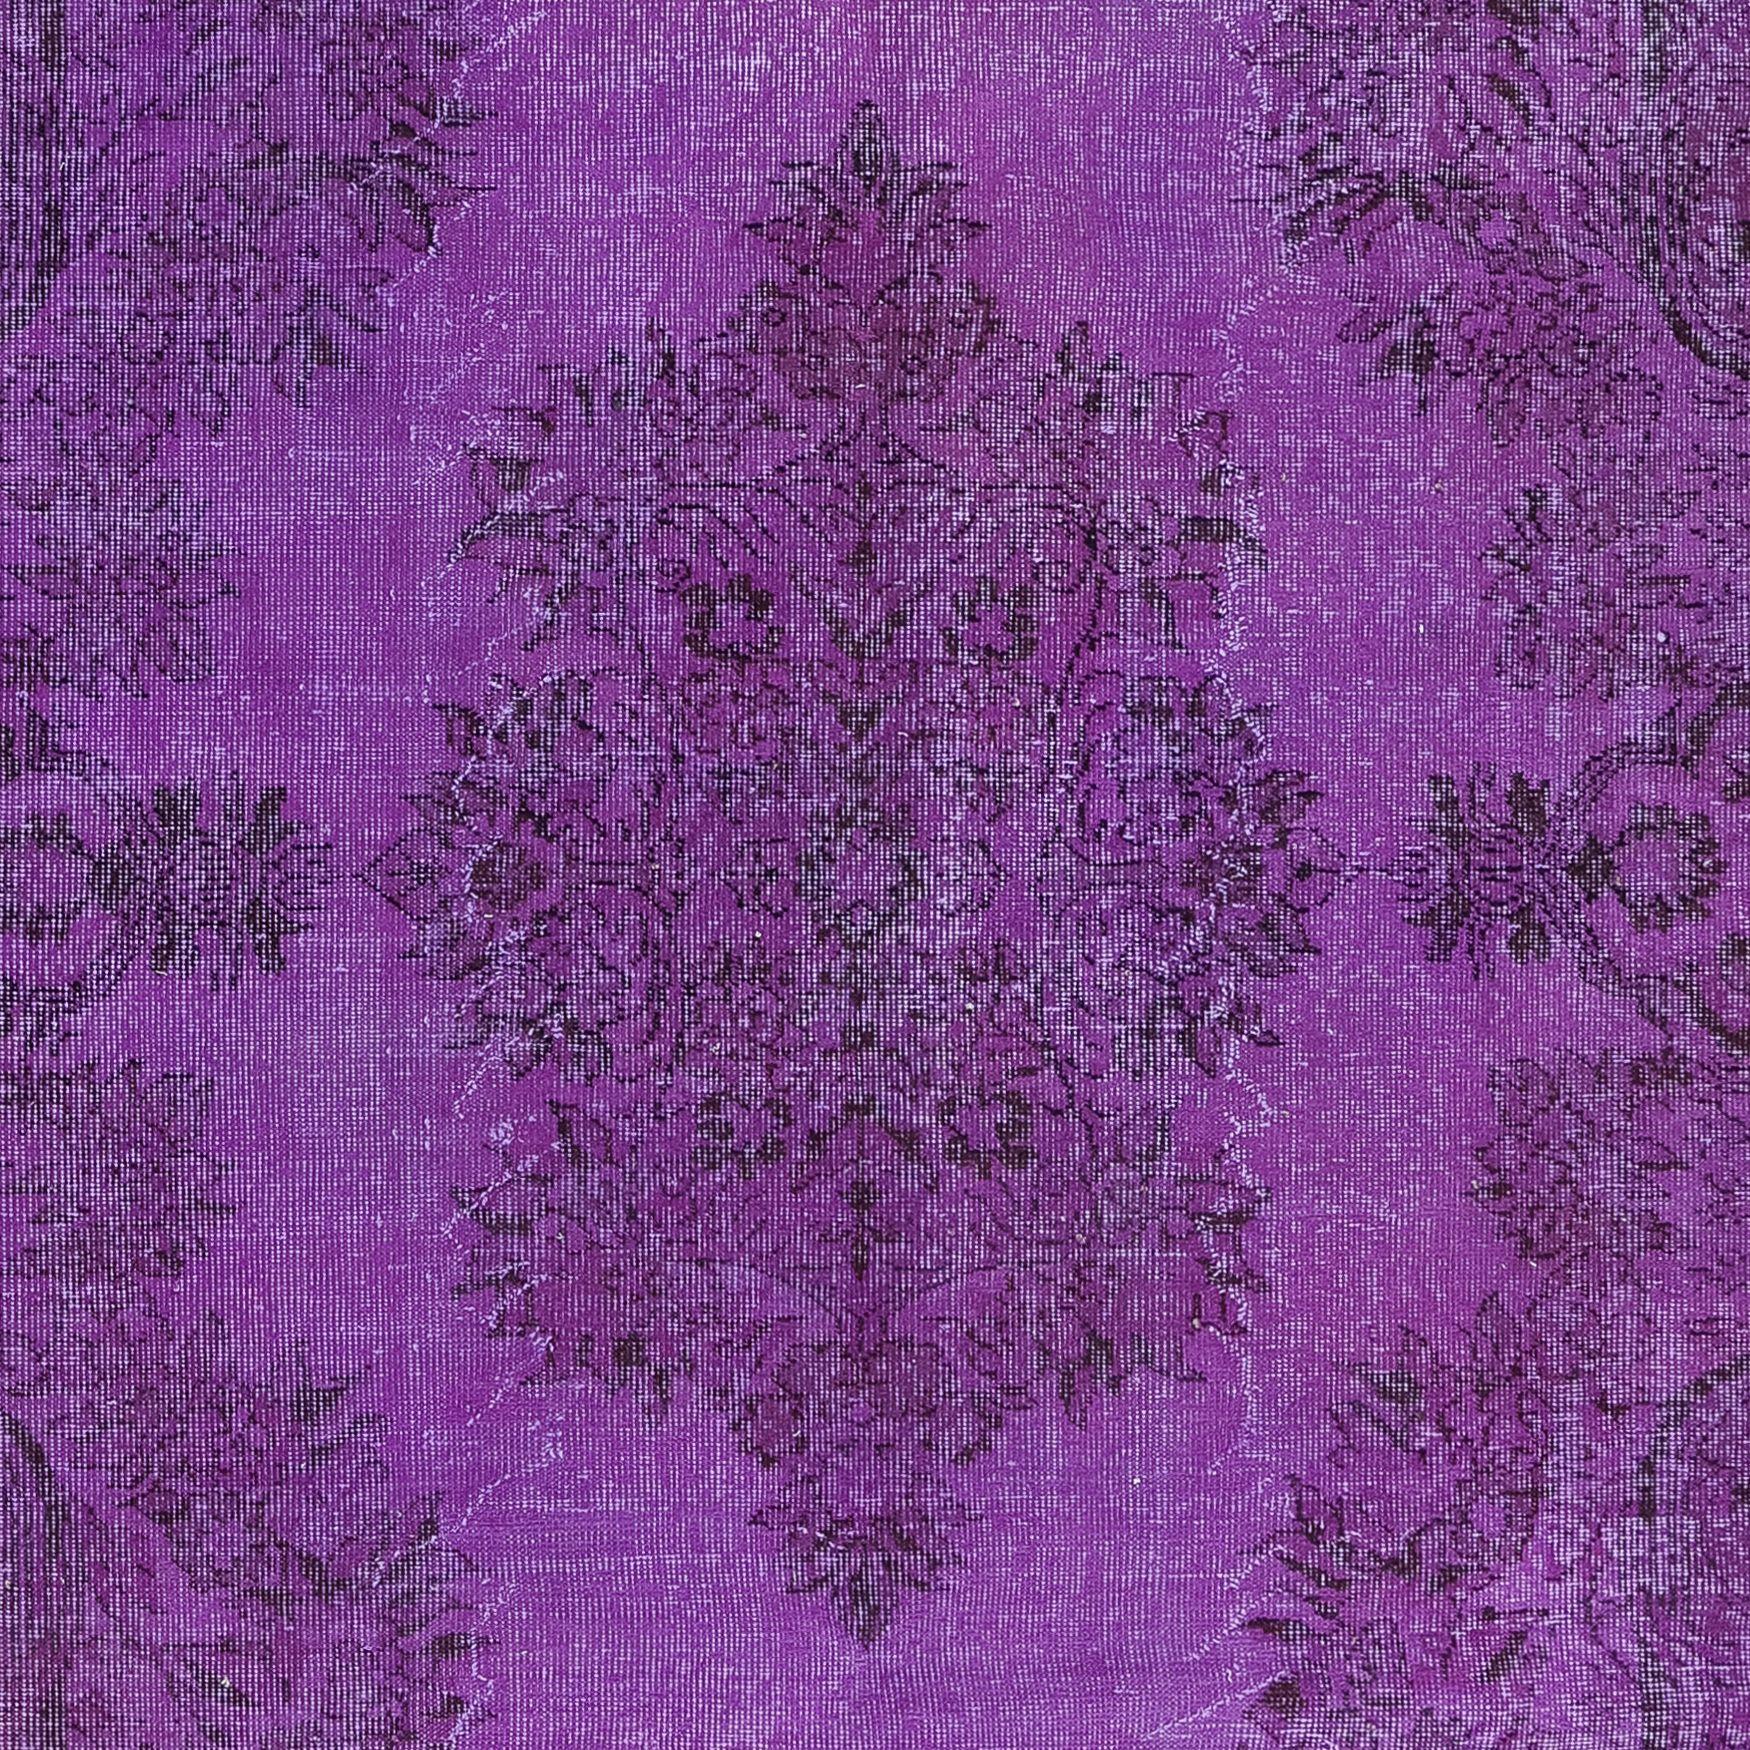 Turkish 5.7x9 Ft Decorative Area Rug in Purple for Modern Interiors, Handmade in Turkey For Sale